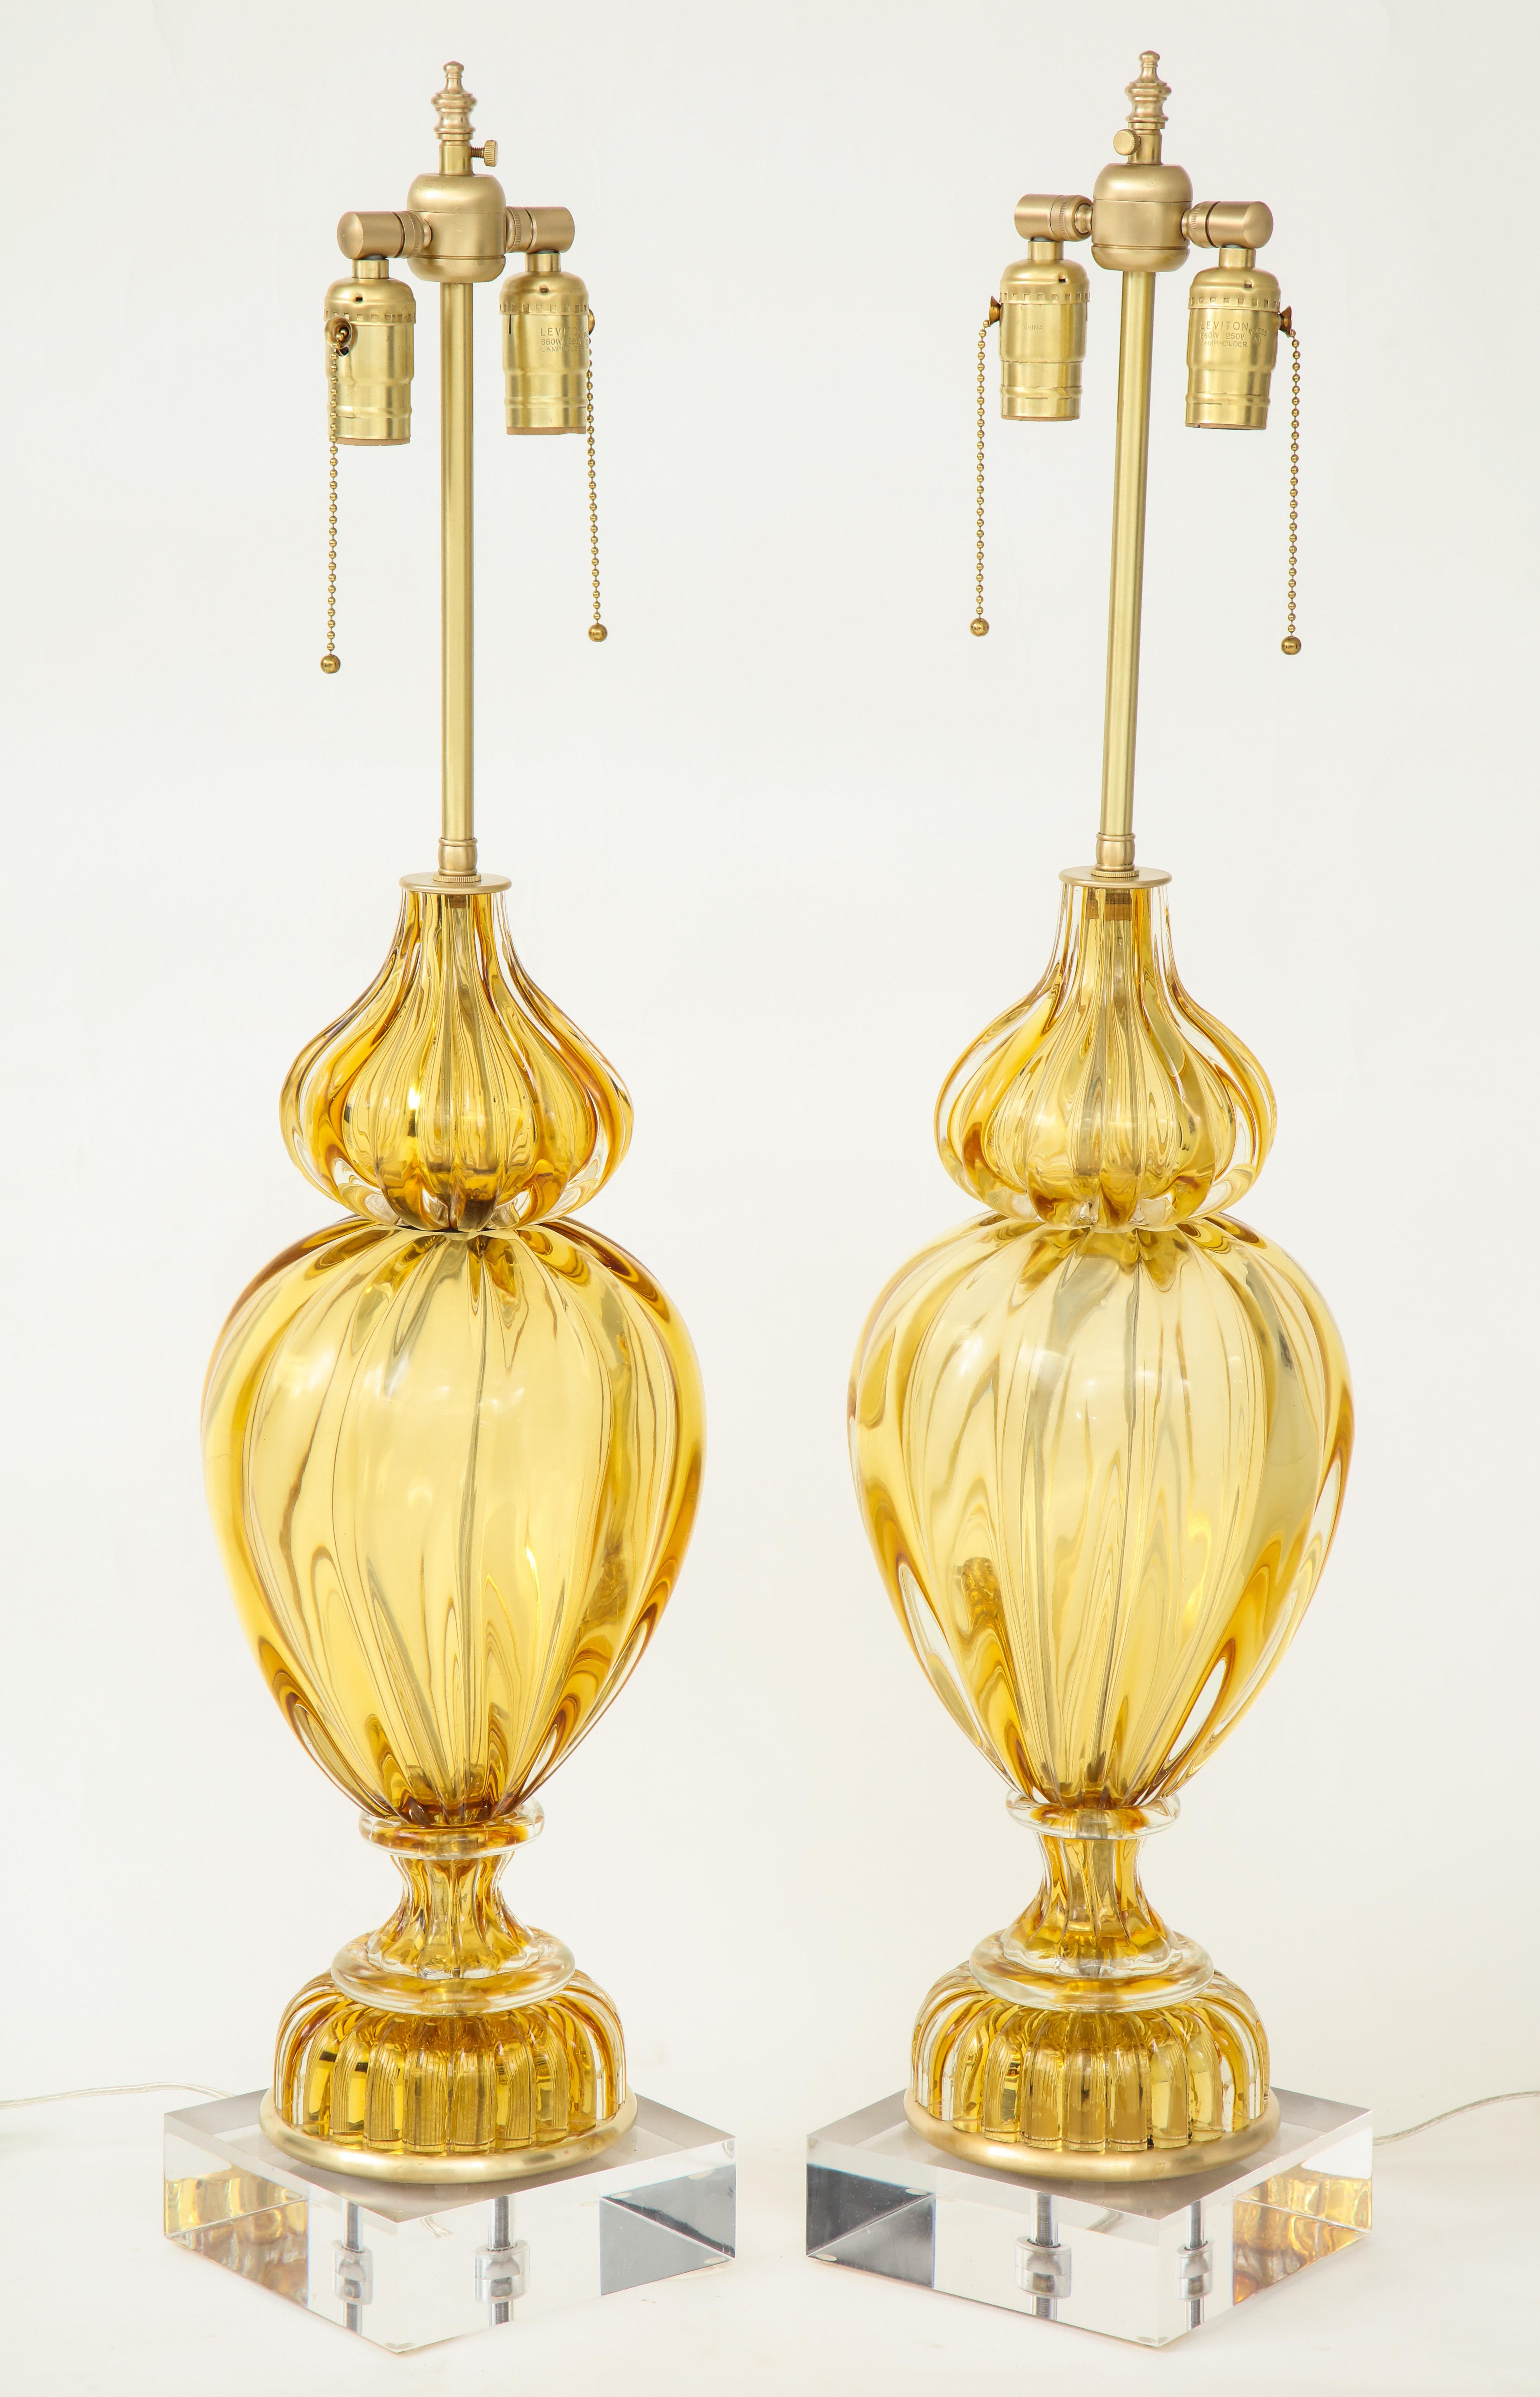 Striking pair of fluted Murano glass lamps in a light amber color with brass fittings sitting on custom Lucite bases. Rewired for use in the USA with brass double pull chain sockets. Seguso glass for Marbro.